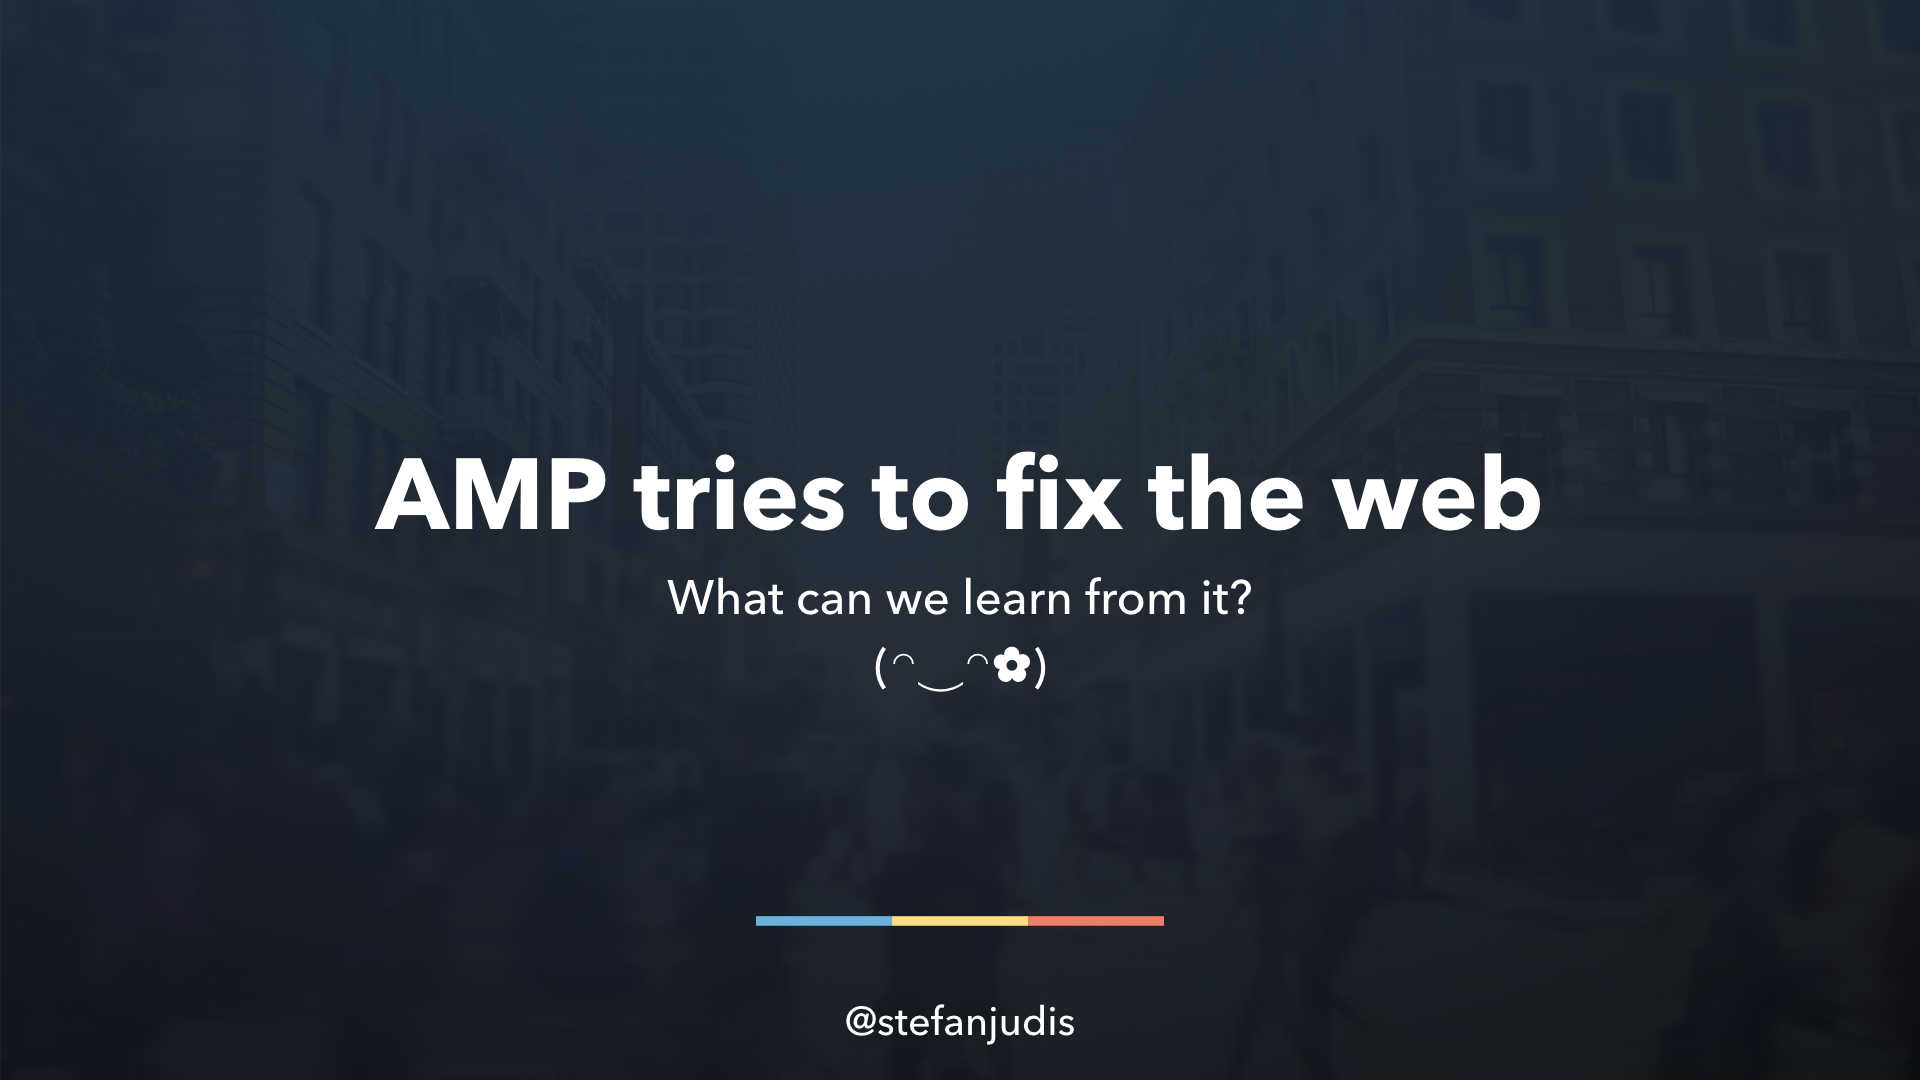 AMP tries to fix the web - what can we learn from it